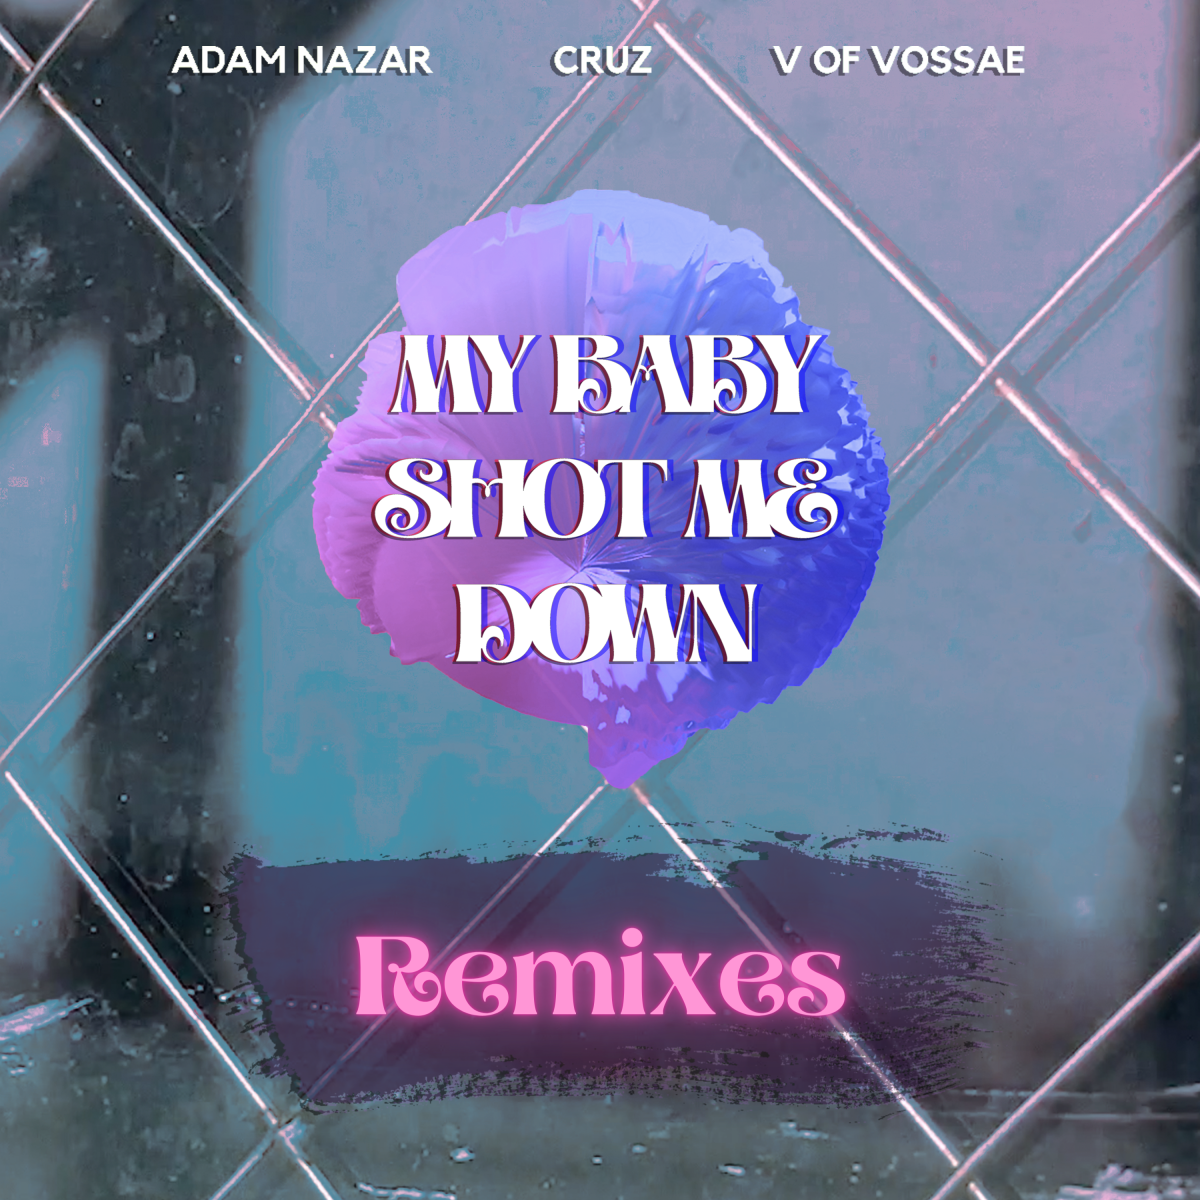 Artwork for the "My Baby Shot Me Down" remix package, released by Cruz, Adam Nazar, and V for Vossae.